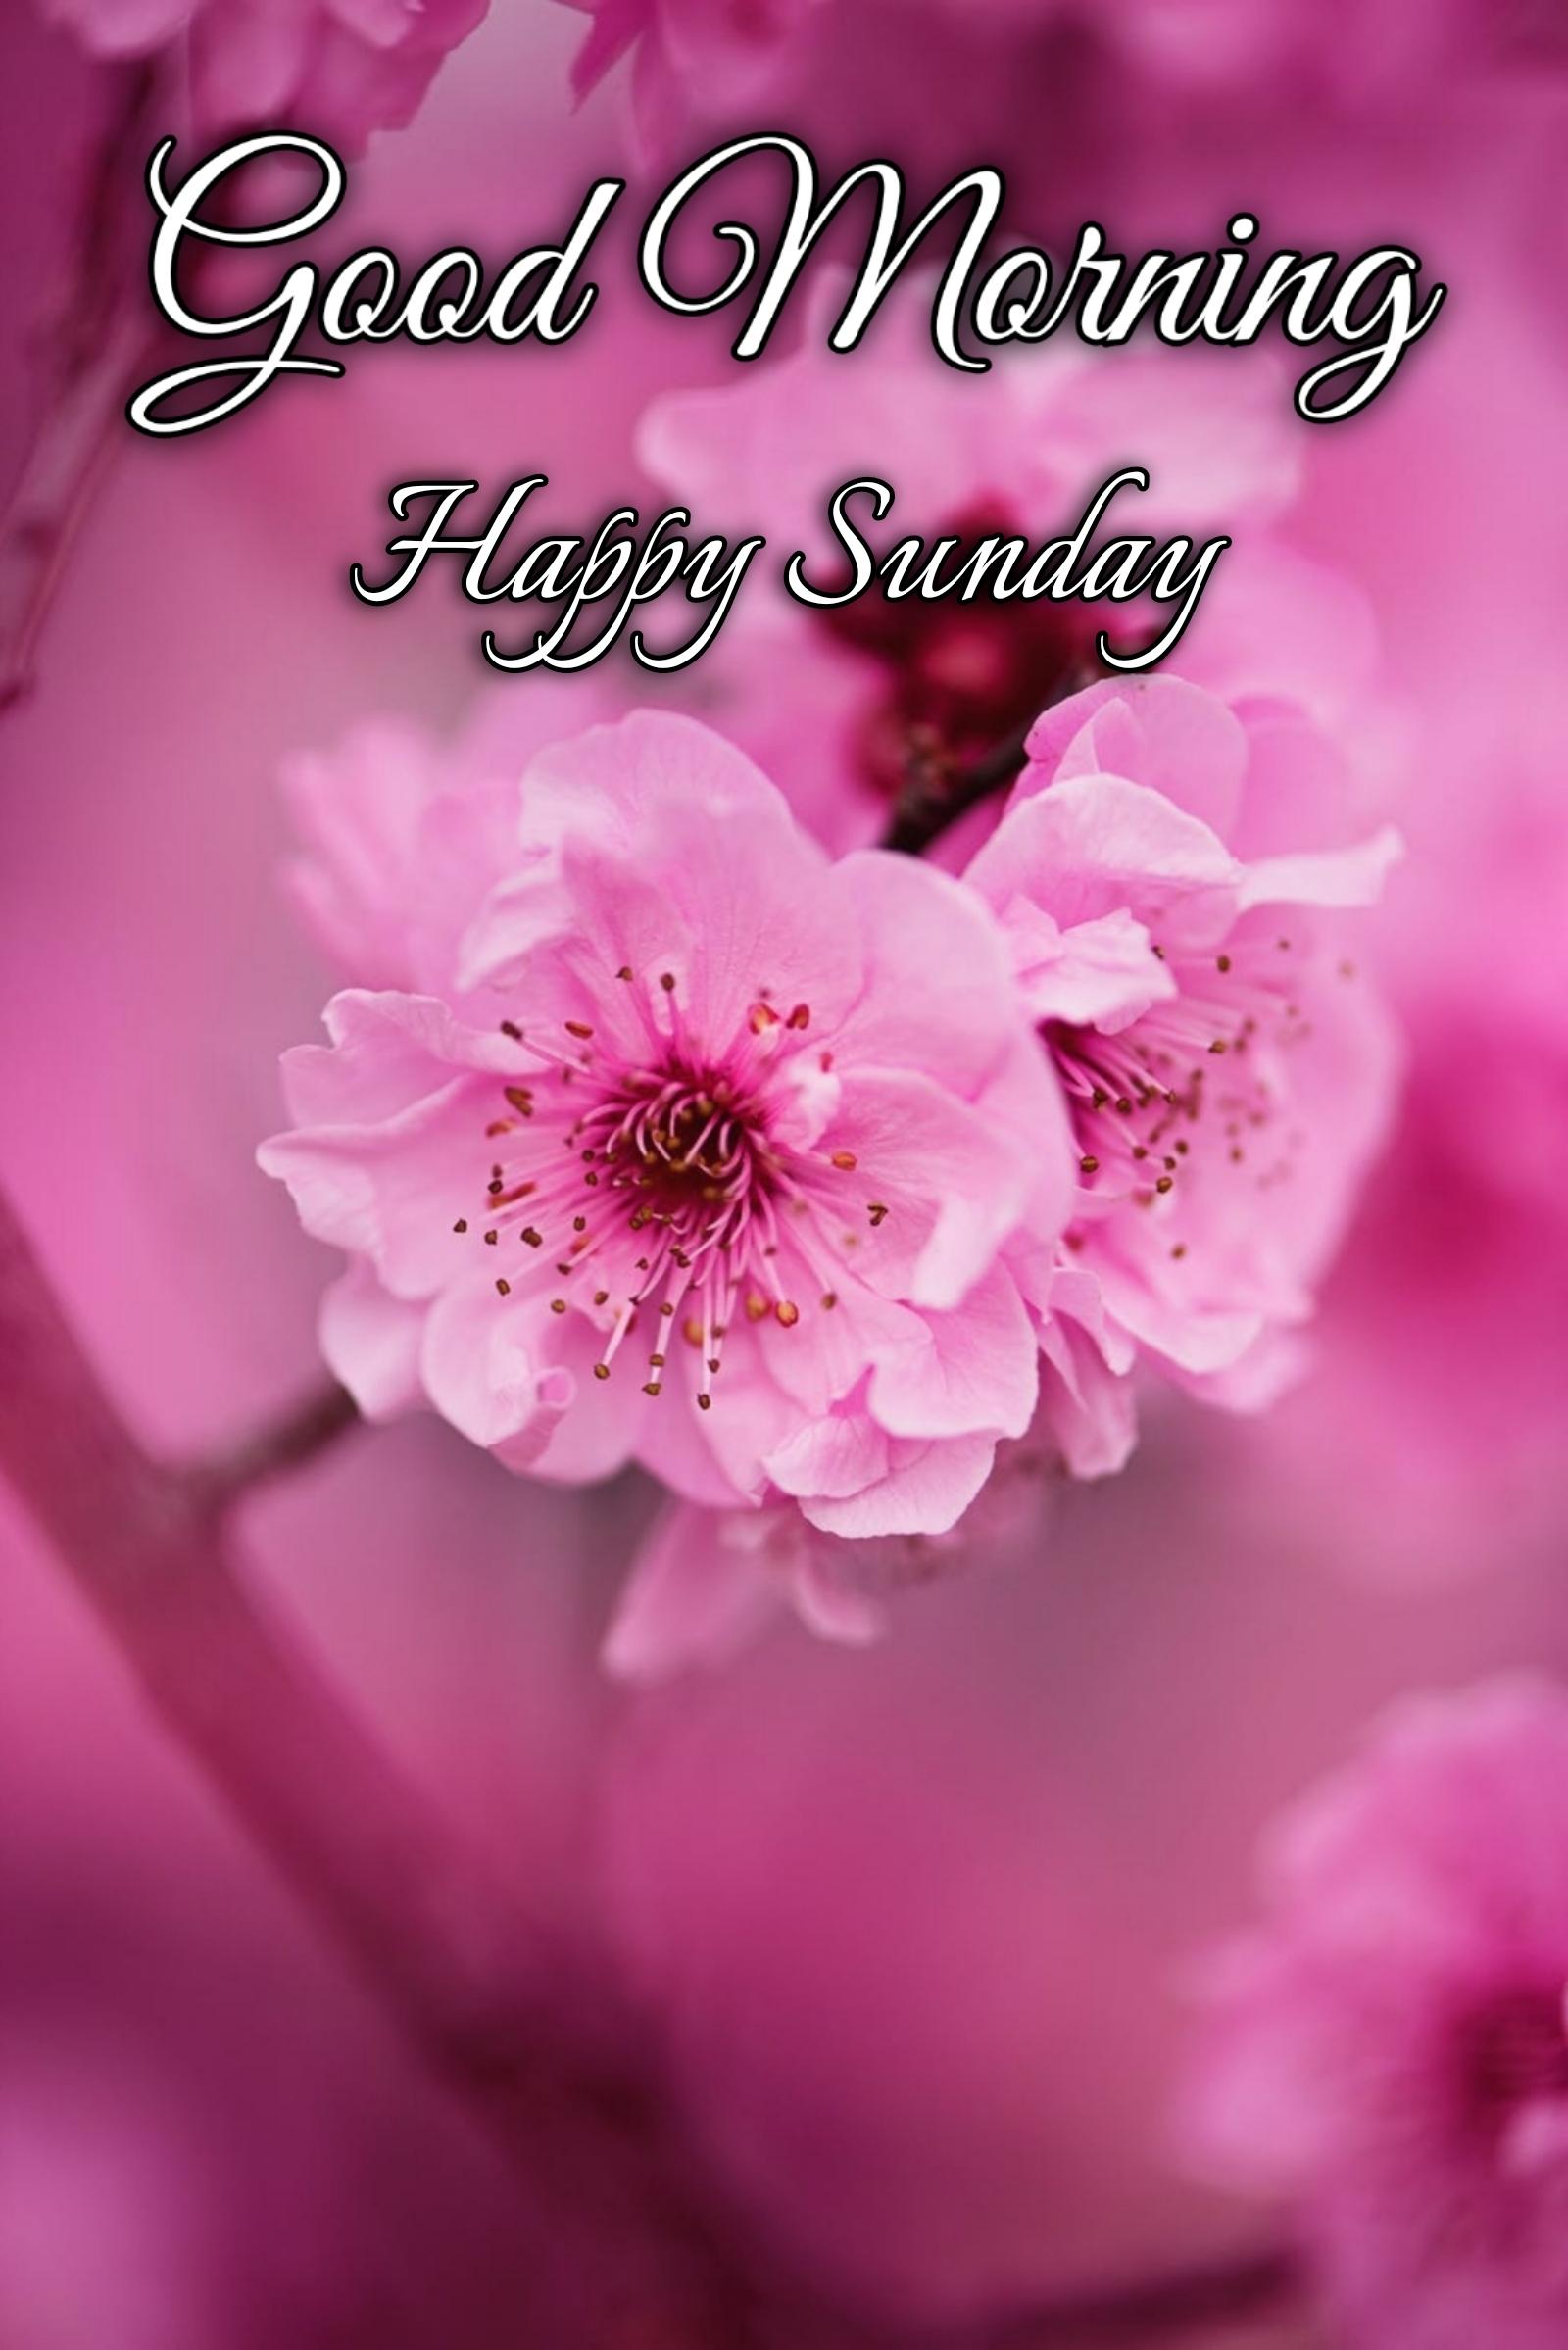 New Good Morning Happy Sunday Images 2022 HD Download